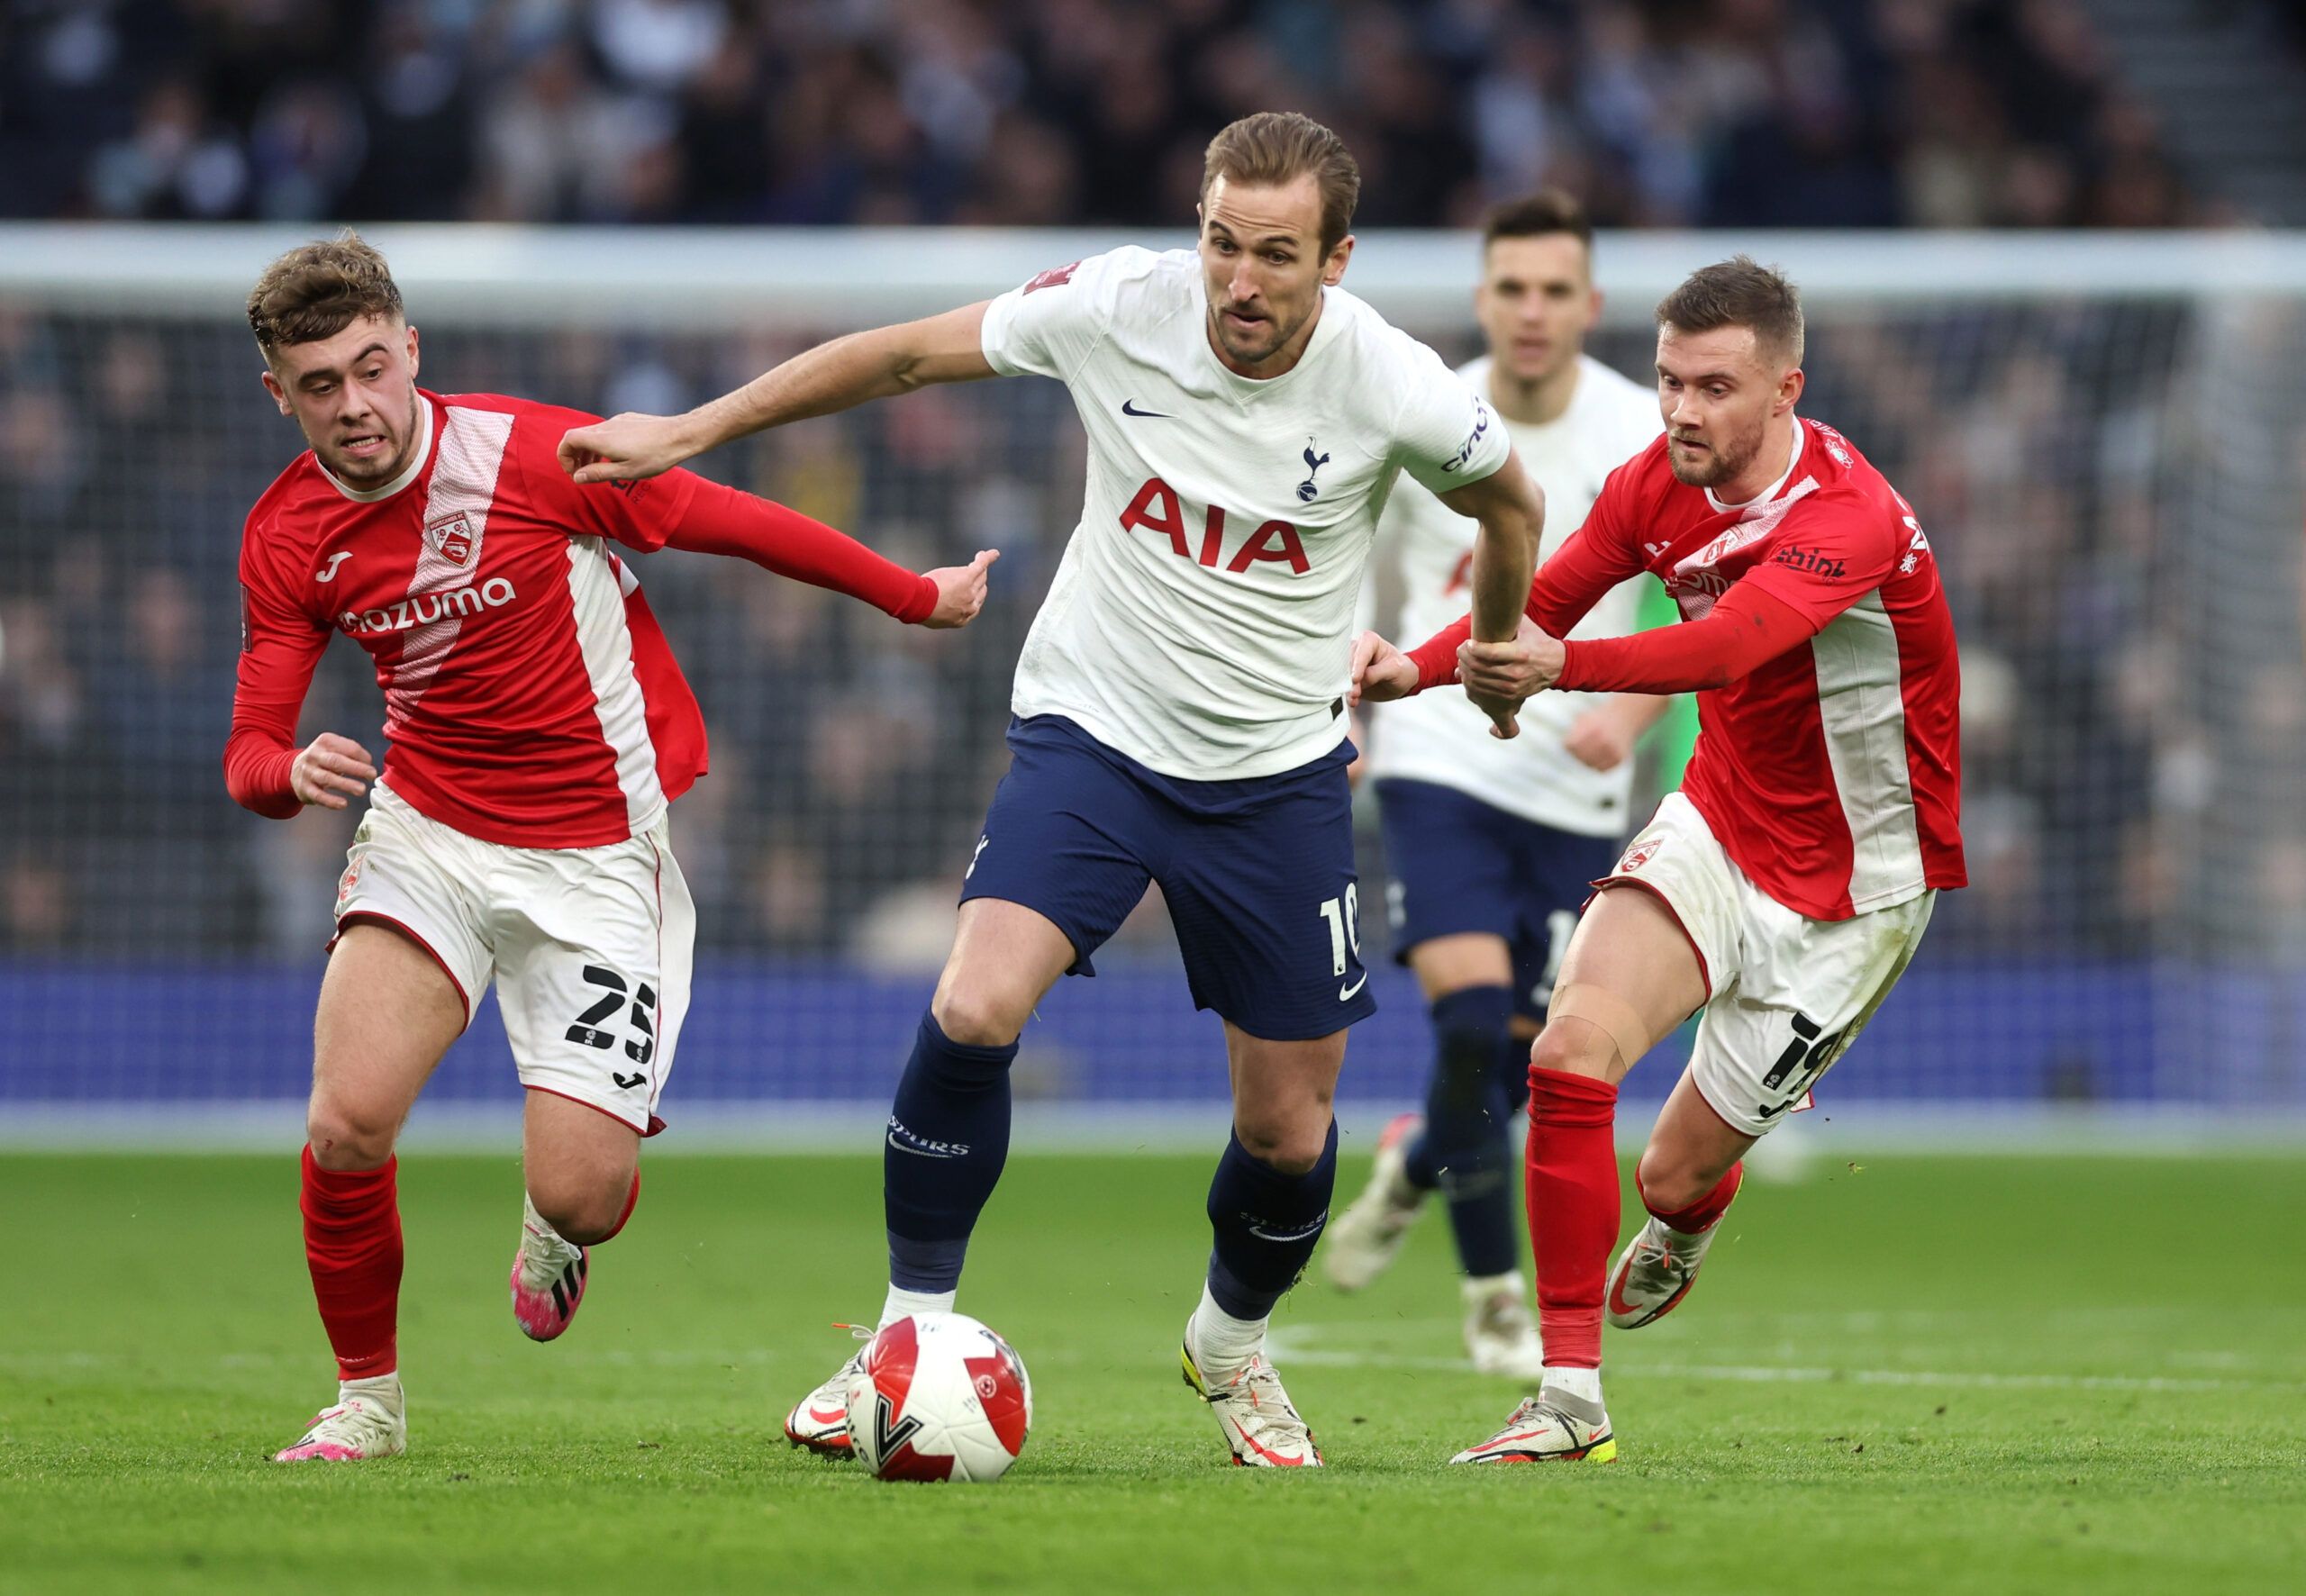 Soccer Football - FA Cup Third Round - Tottenham Hotspur v Morecambe - Tottenham Hotspur Stadium, London, Britain - January 9, 2022 Tottenham Hotspur's Harry Kane in action with Morecambe's Alfie McCalmont Action Images via Reuters/Matthew Childs